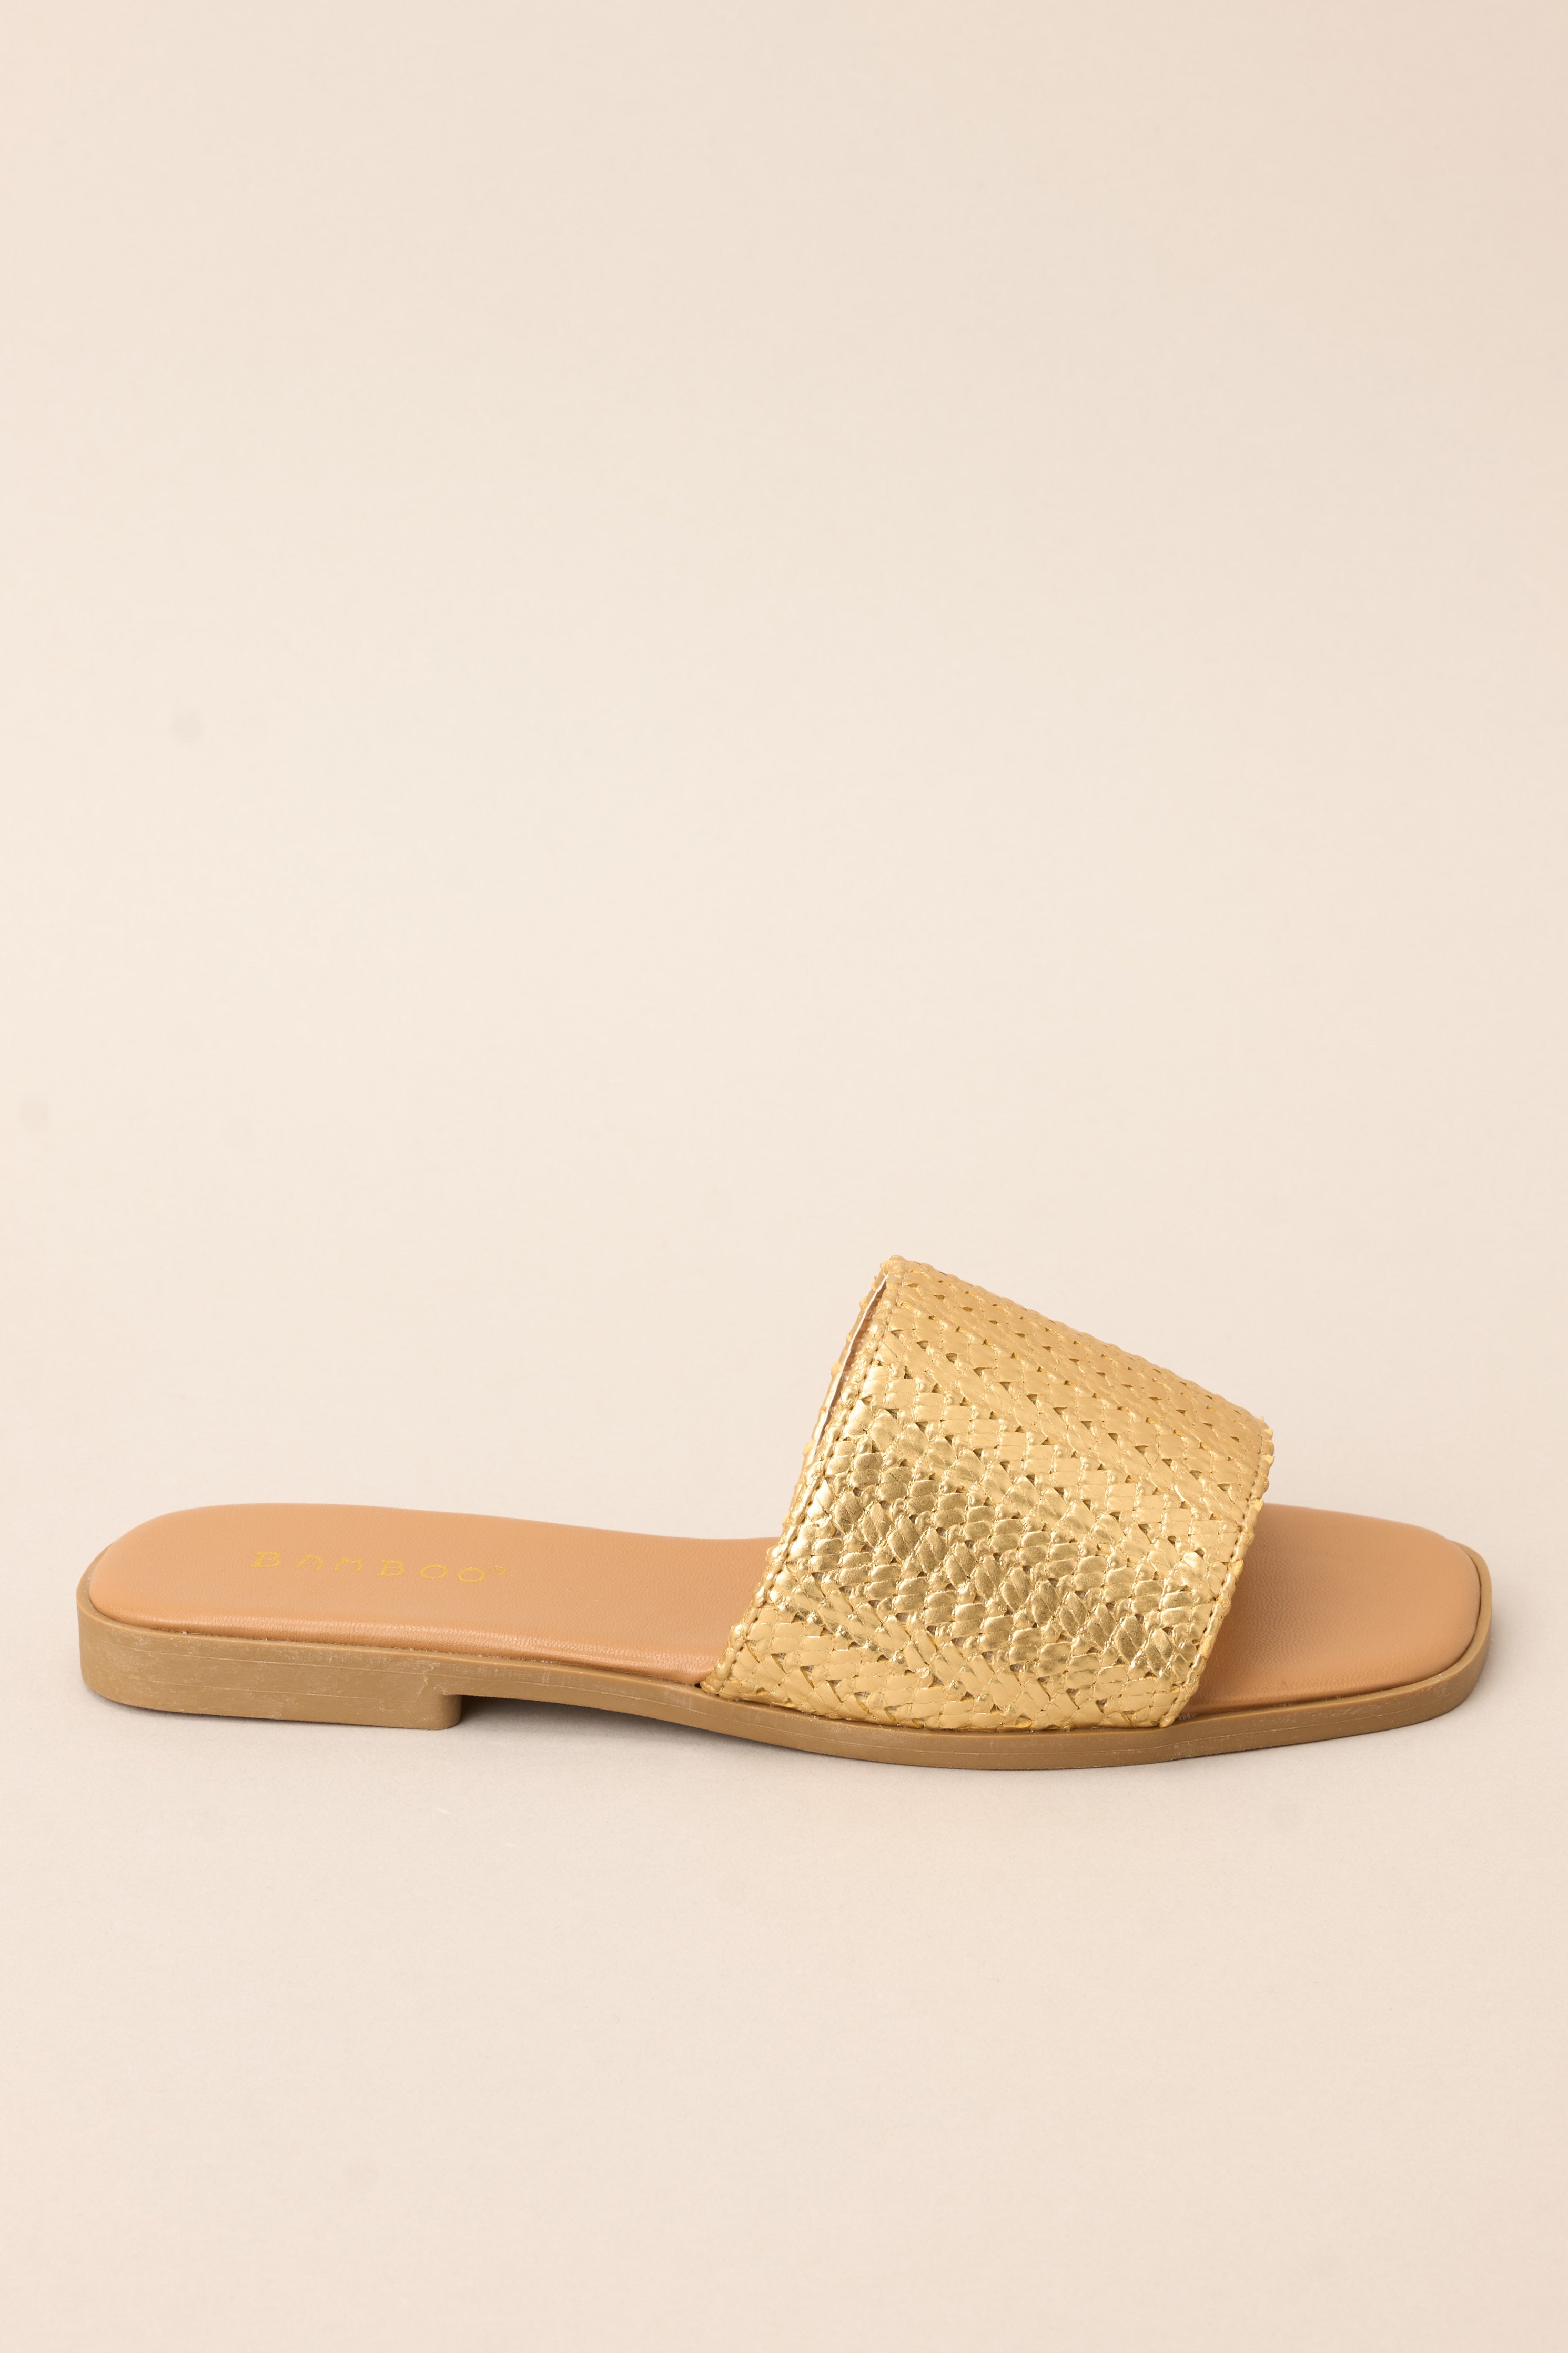 Full side view of these sandals that feature a gold detailed strap over the foot and a slip-on style. 